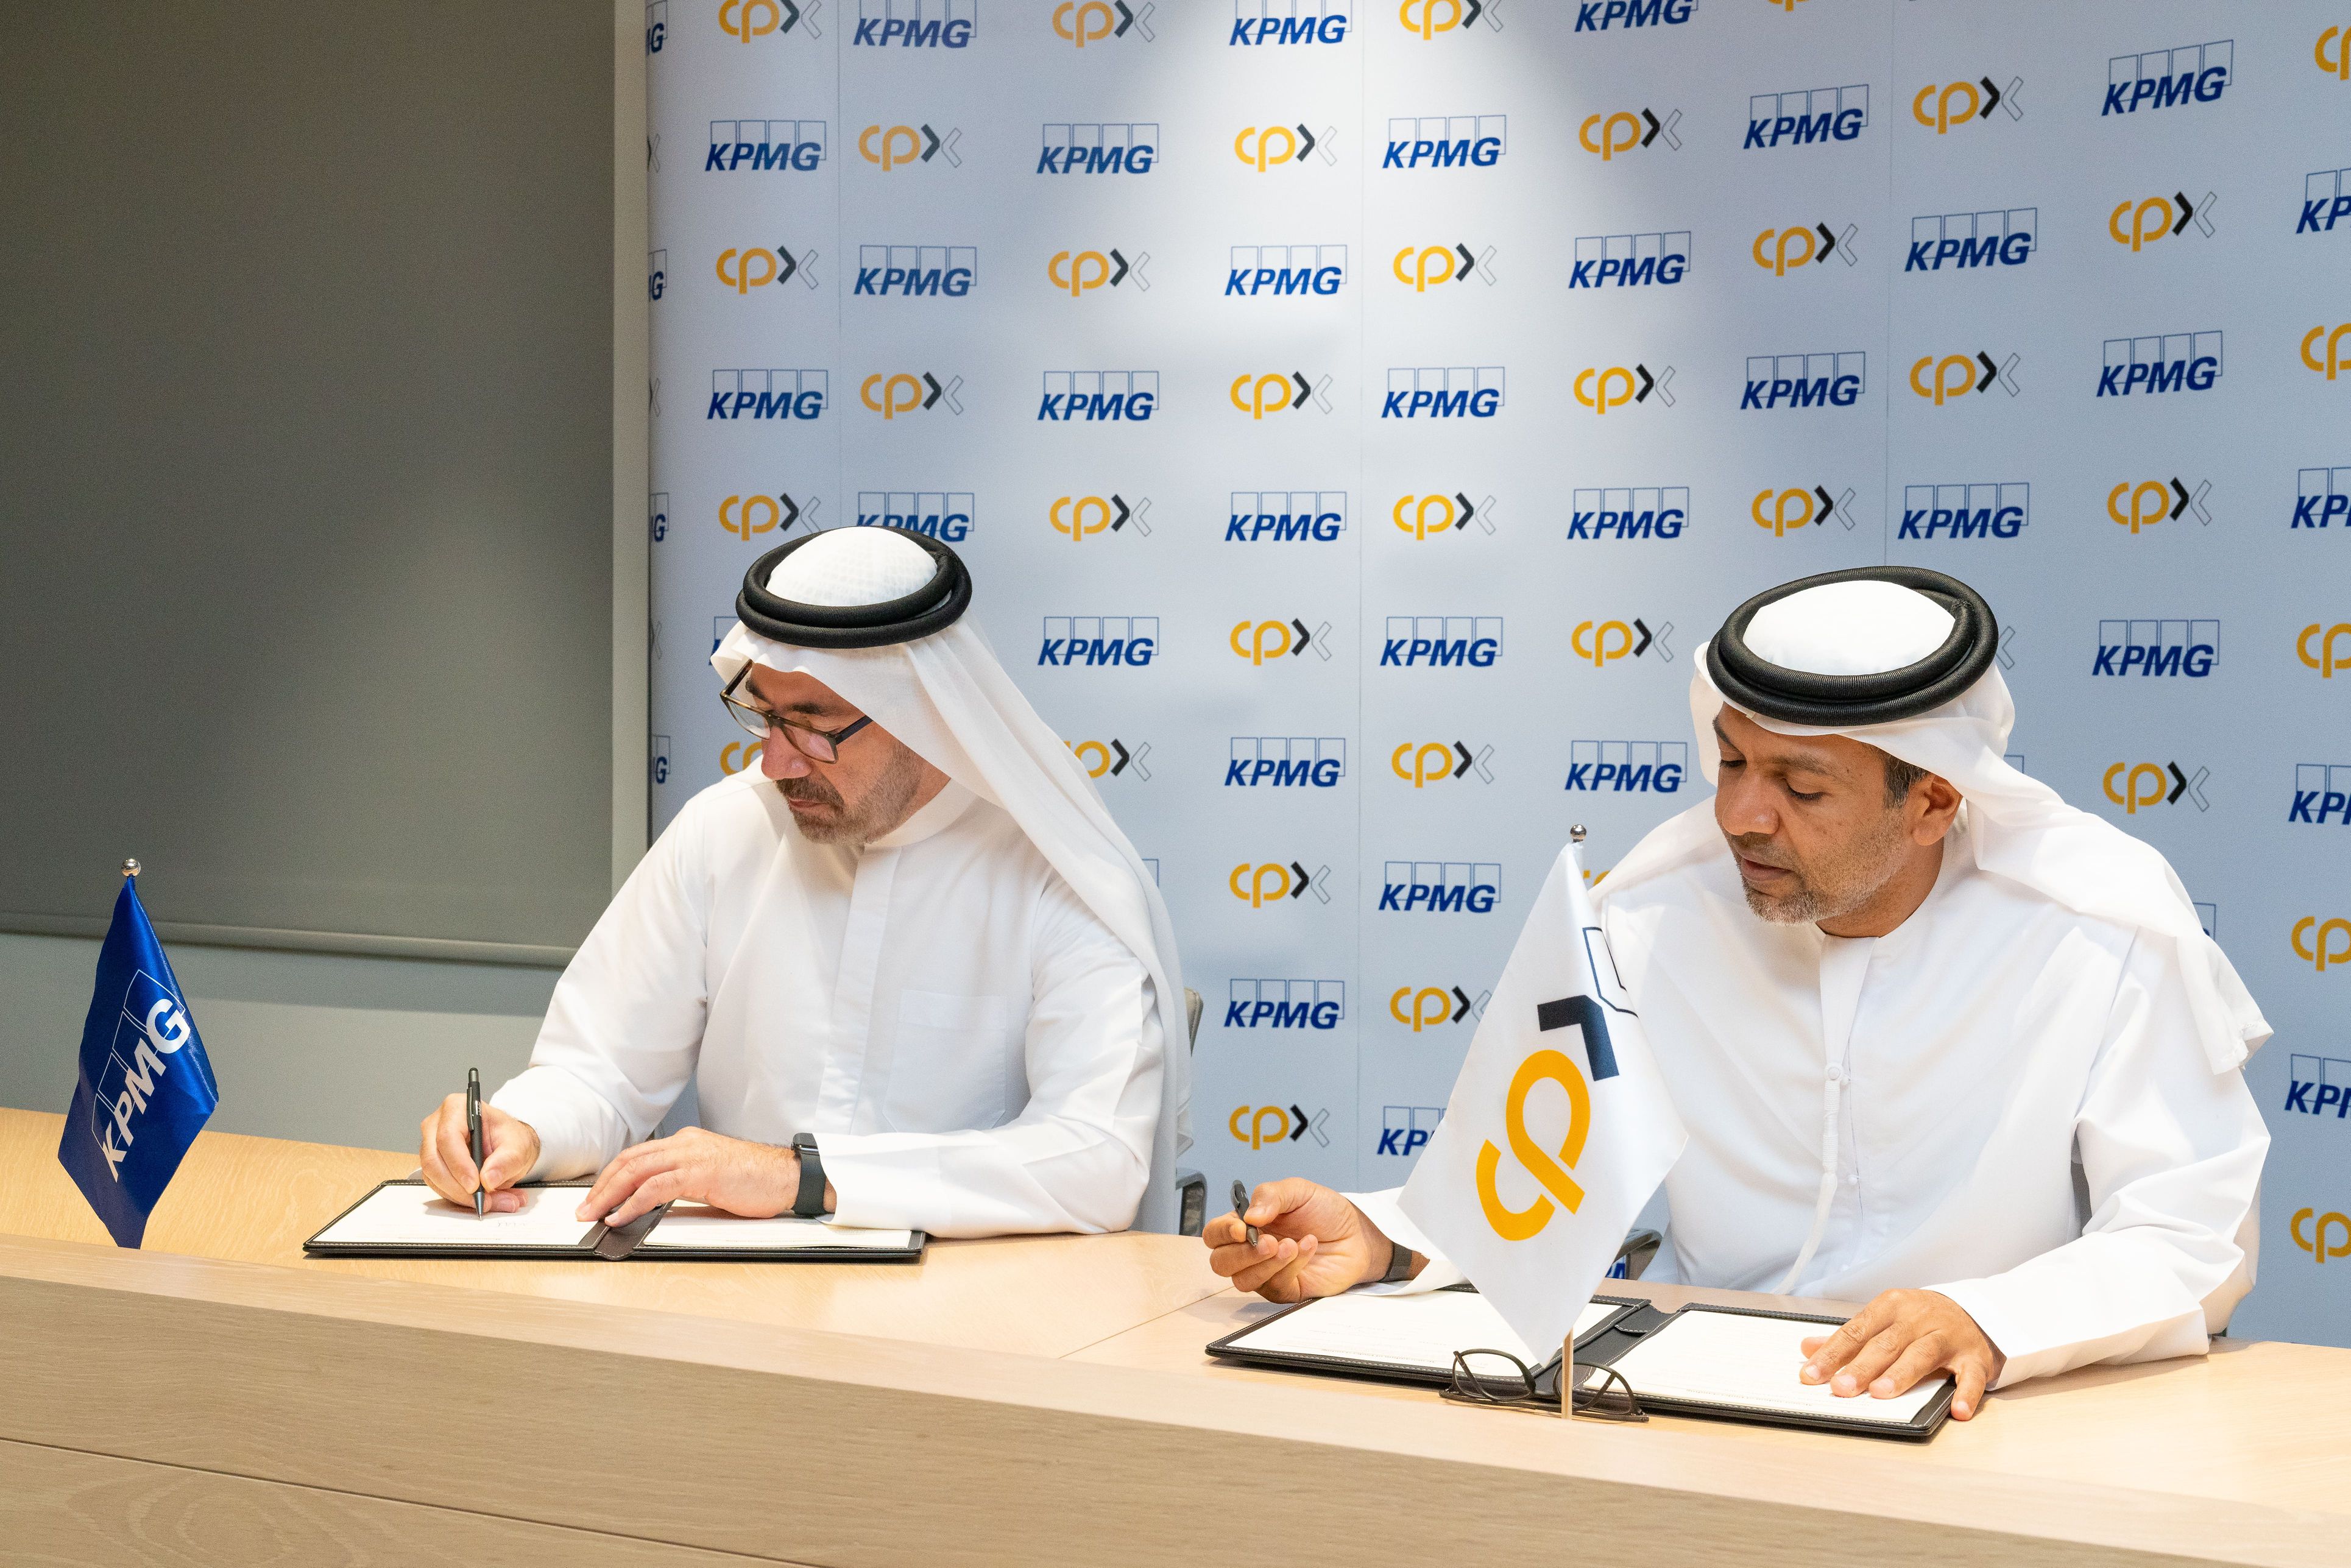 kpmg-cpx-mou-signing